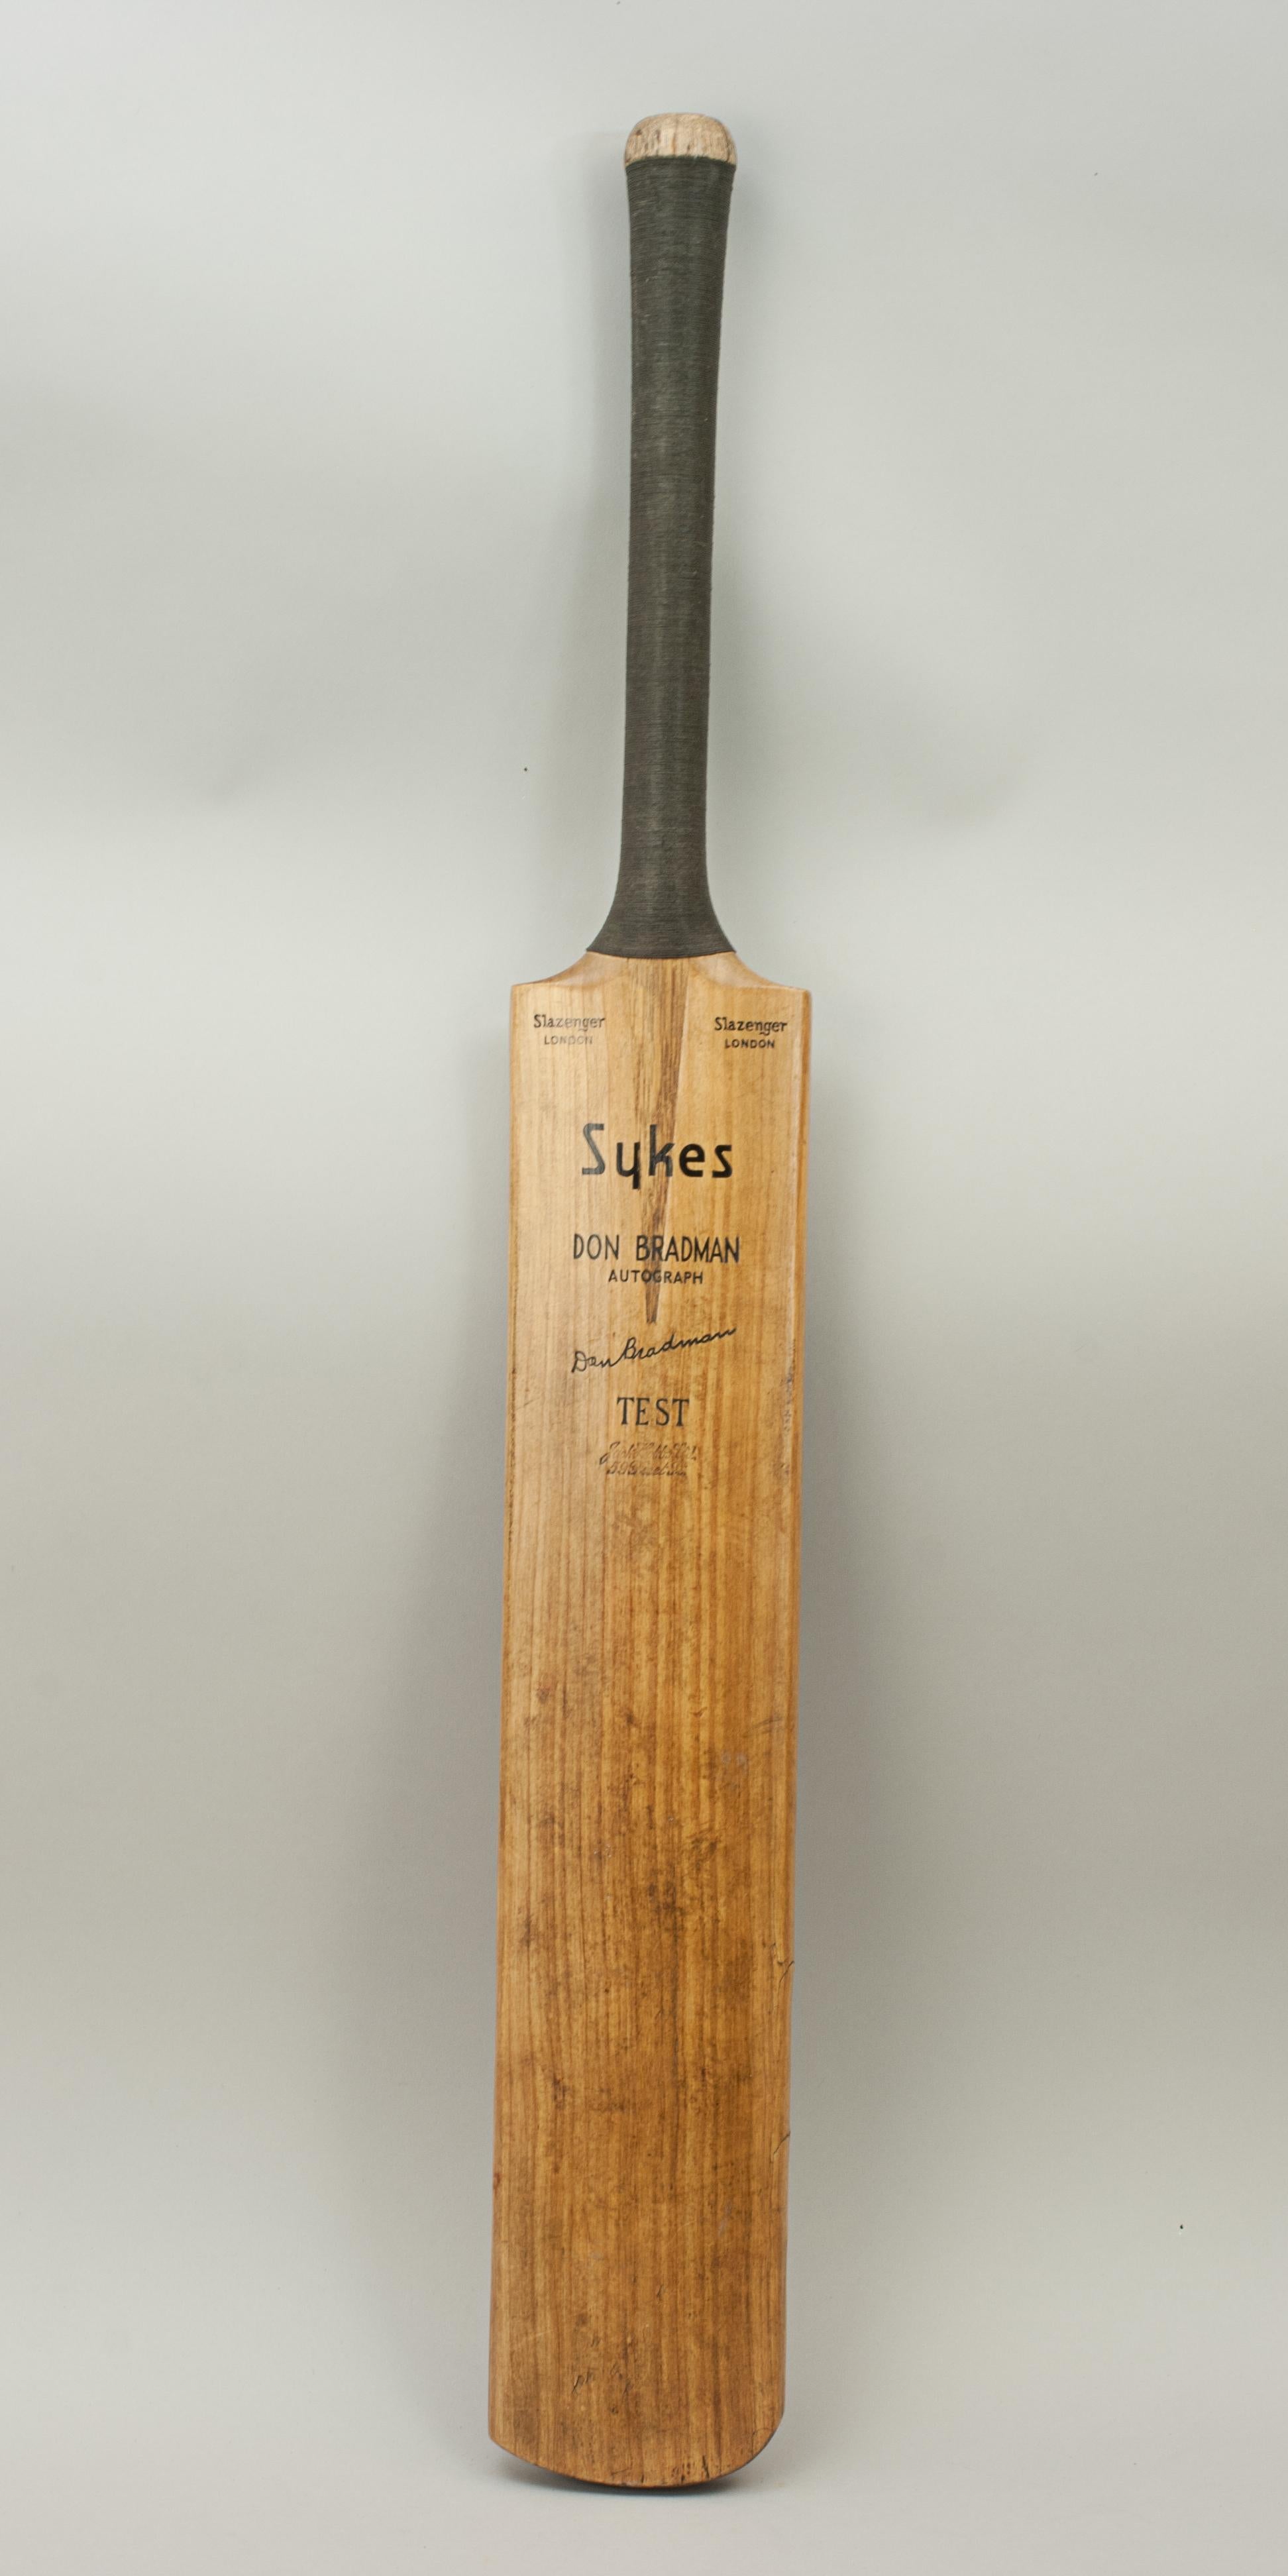 Sykes 'Don Bradman' Autograph Cricket Bat.
A fine Sykes, Slazenger 'Don Bradman' autograph cricket bat. The blade is clean and in very good condition with a cord strung grip and triple sprung handle. The shoulders are embossed 